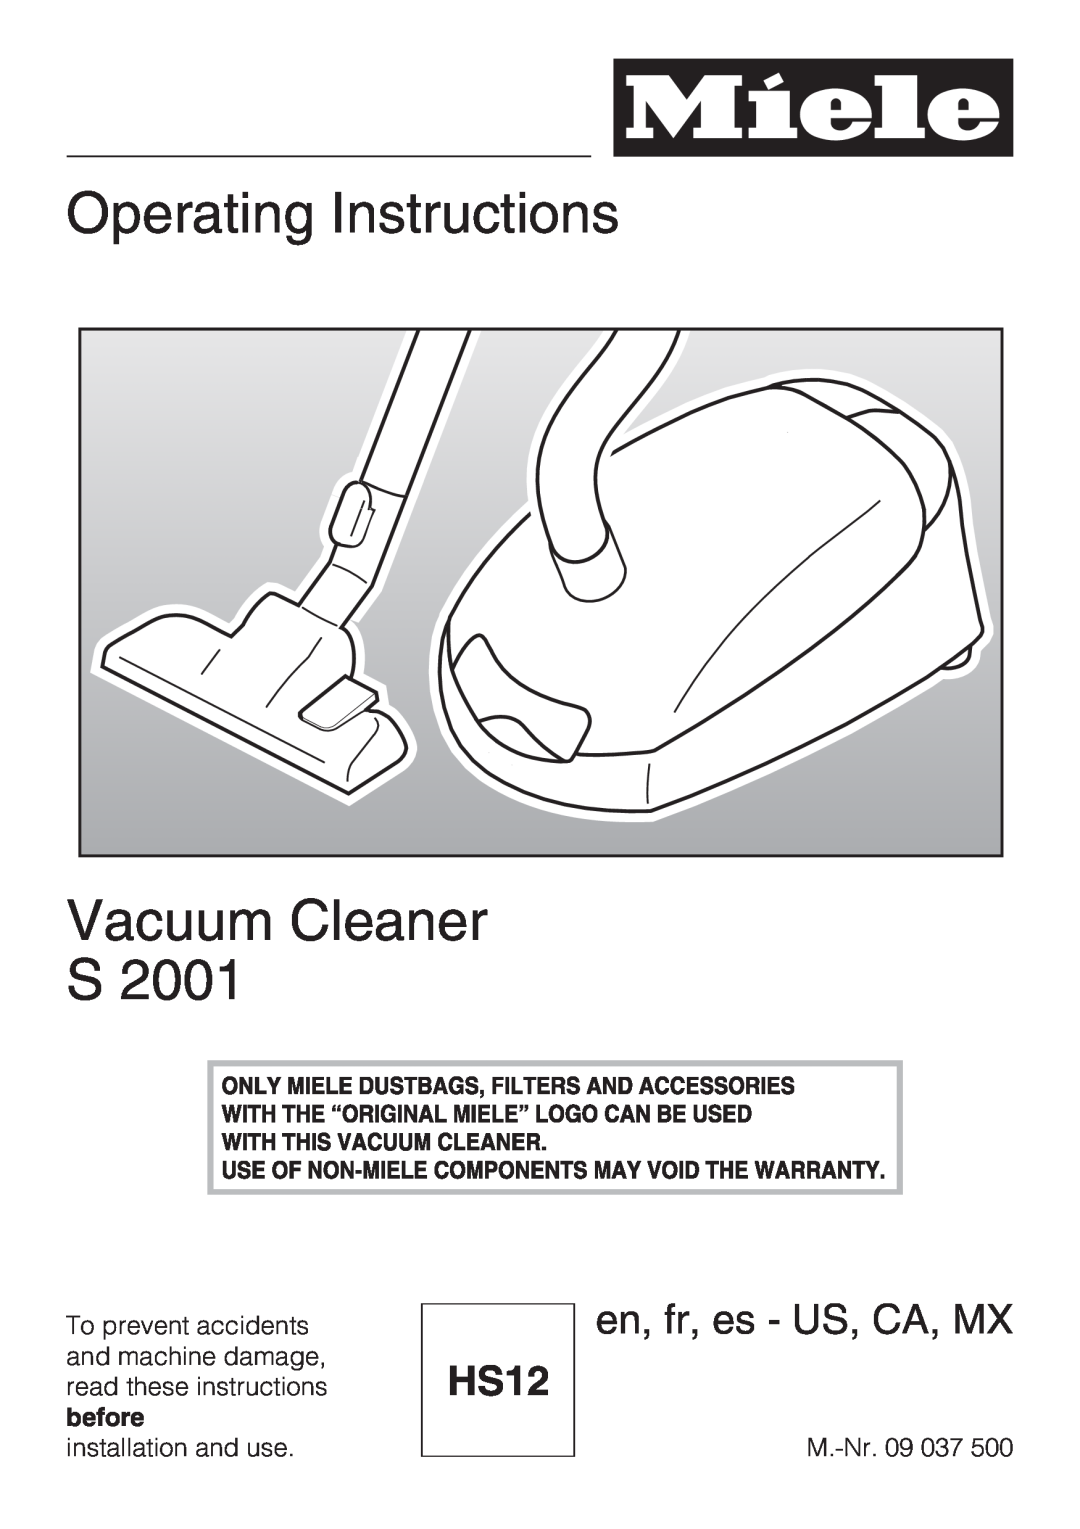 Miele S 2001 manual Operating Instructions Vacuum Cleaner S, HS12, en, fr - US, CA, before 